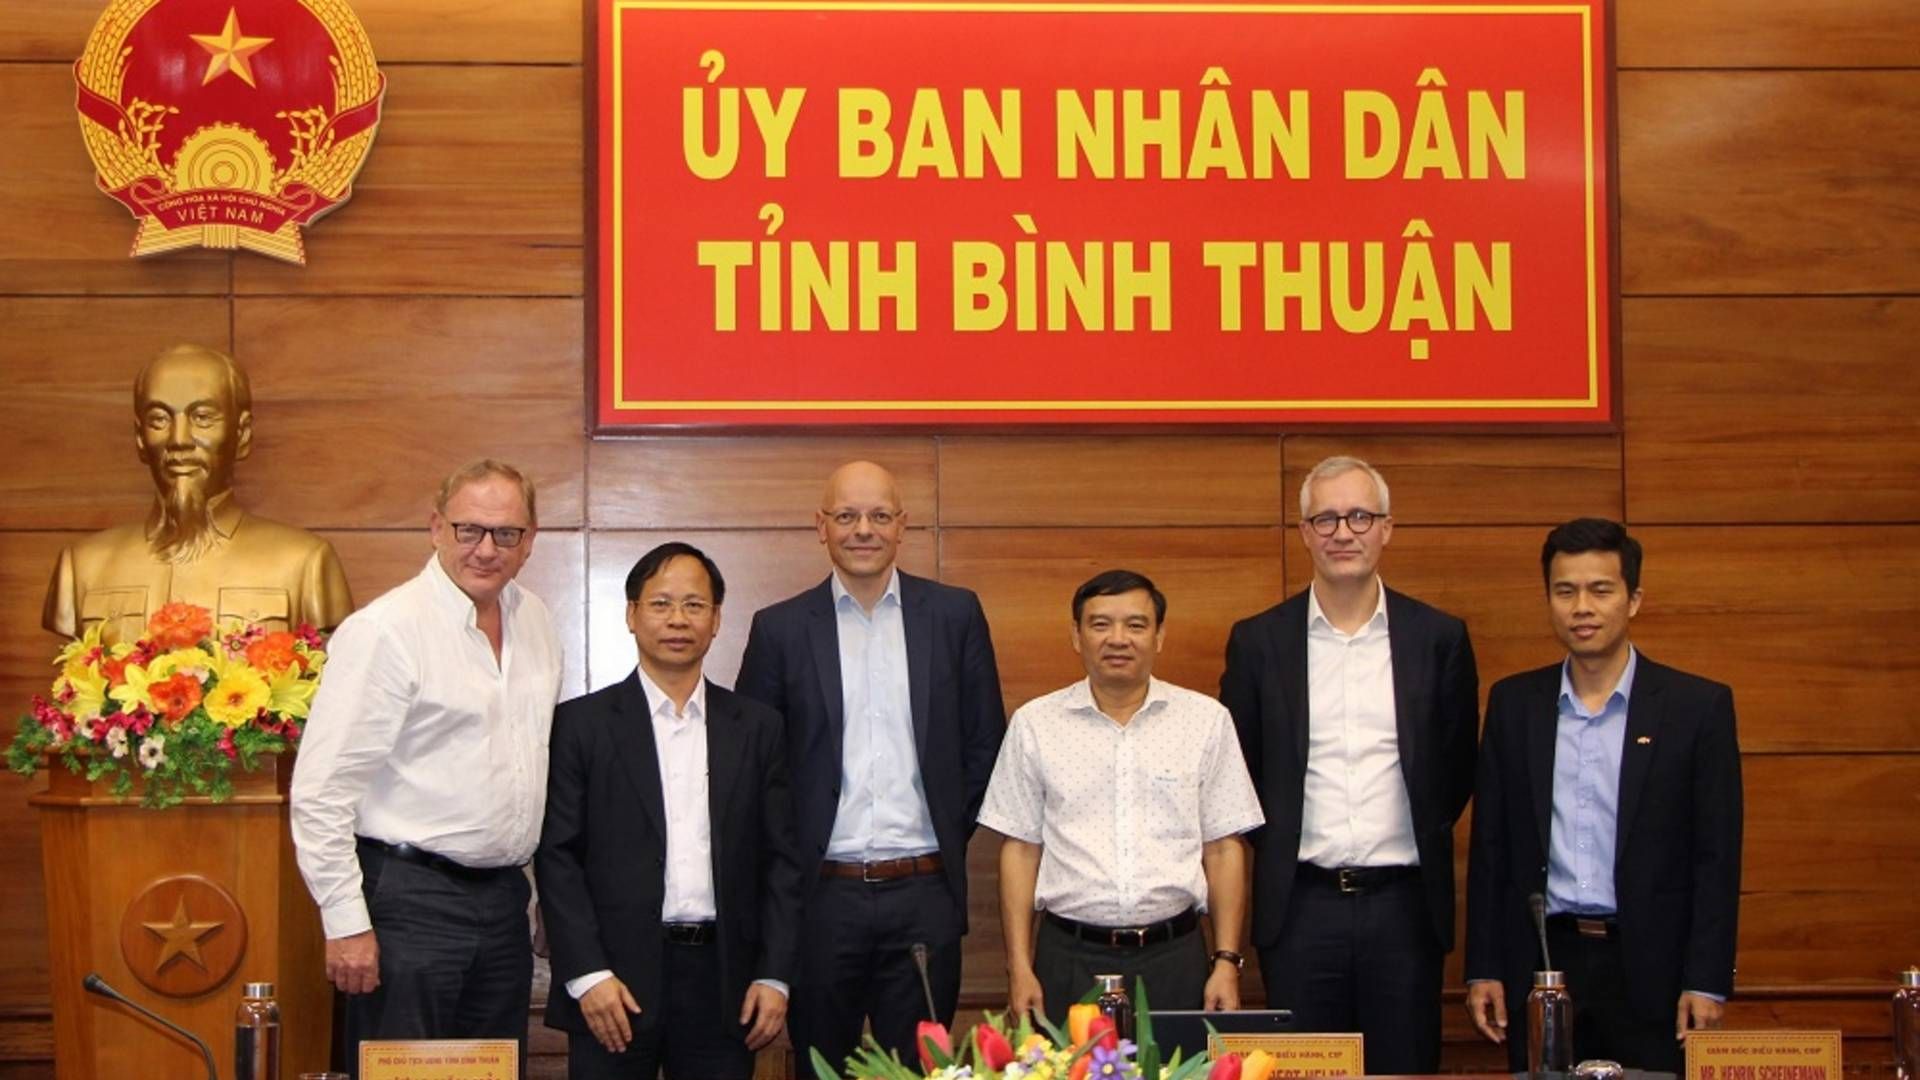 Photo shows the opening of CIP's office in Vietnam earlier this year. | Photo: Tinh Binh Thuan